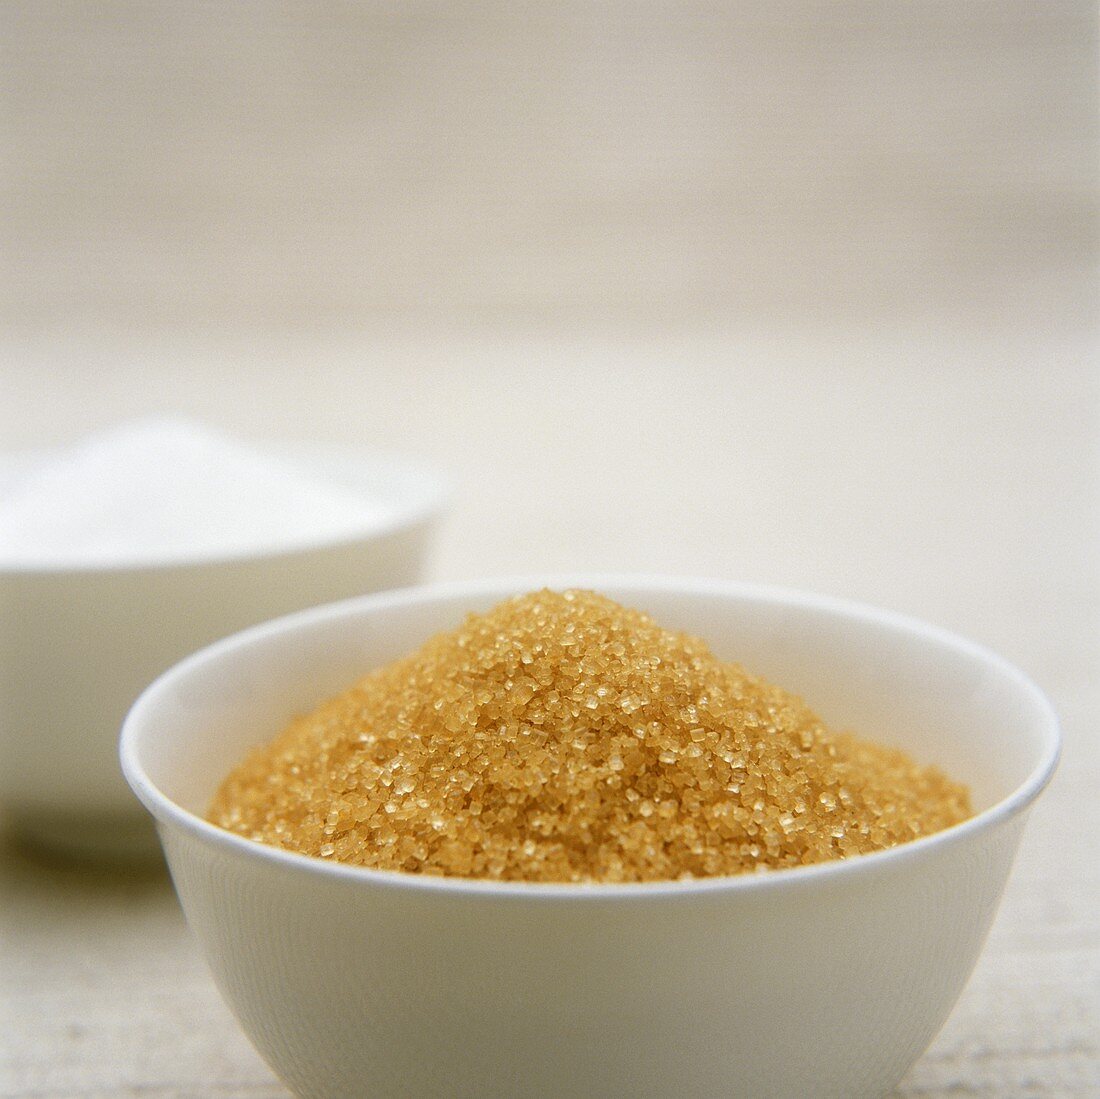 Brown sugar in white bowl in front of white sugar